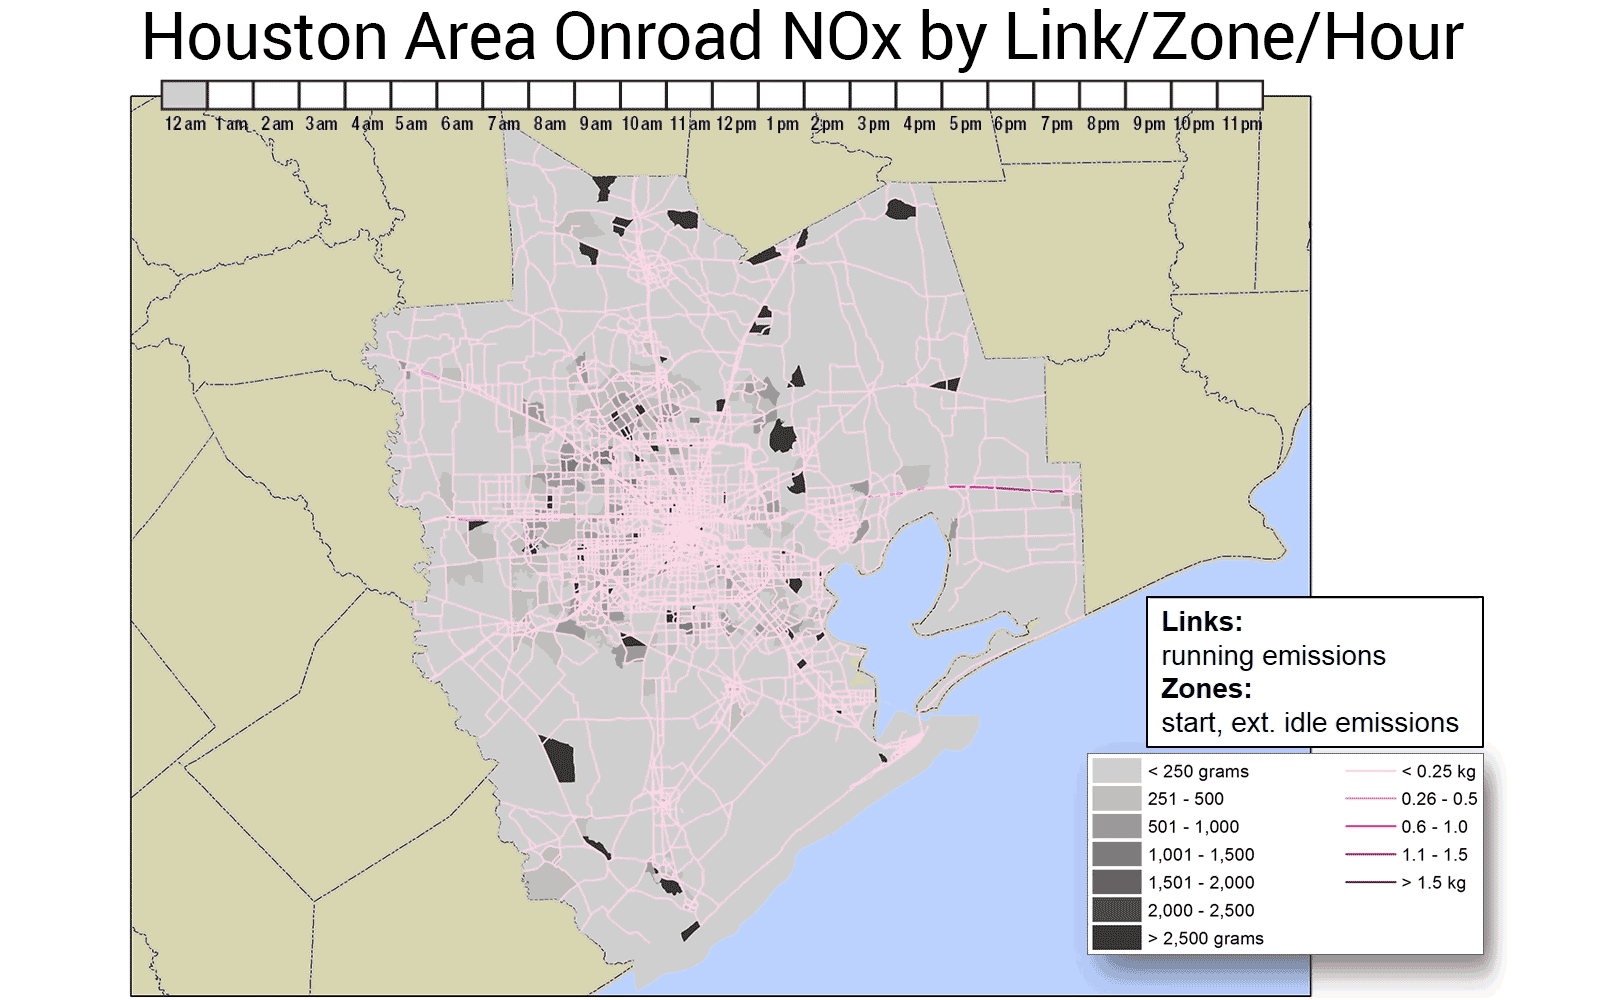 Output of Spatial Emissions Estimator model that uses color coding to show Houston area onroad vehicle nitrous oxides emissions by links, zone, and hour on a GIS map of the area